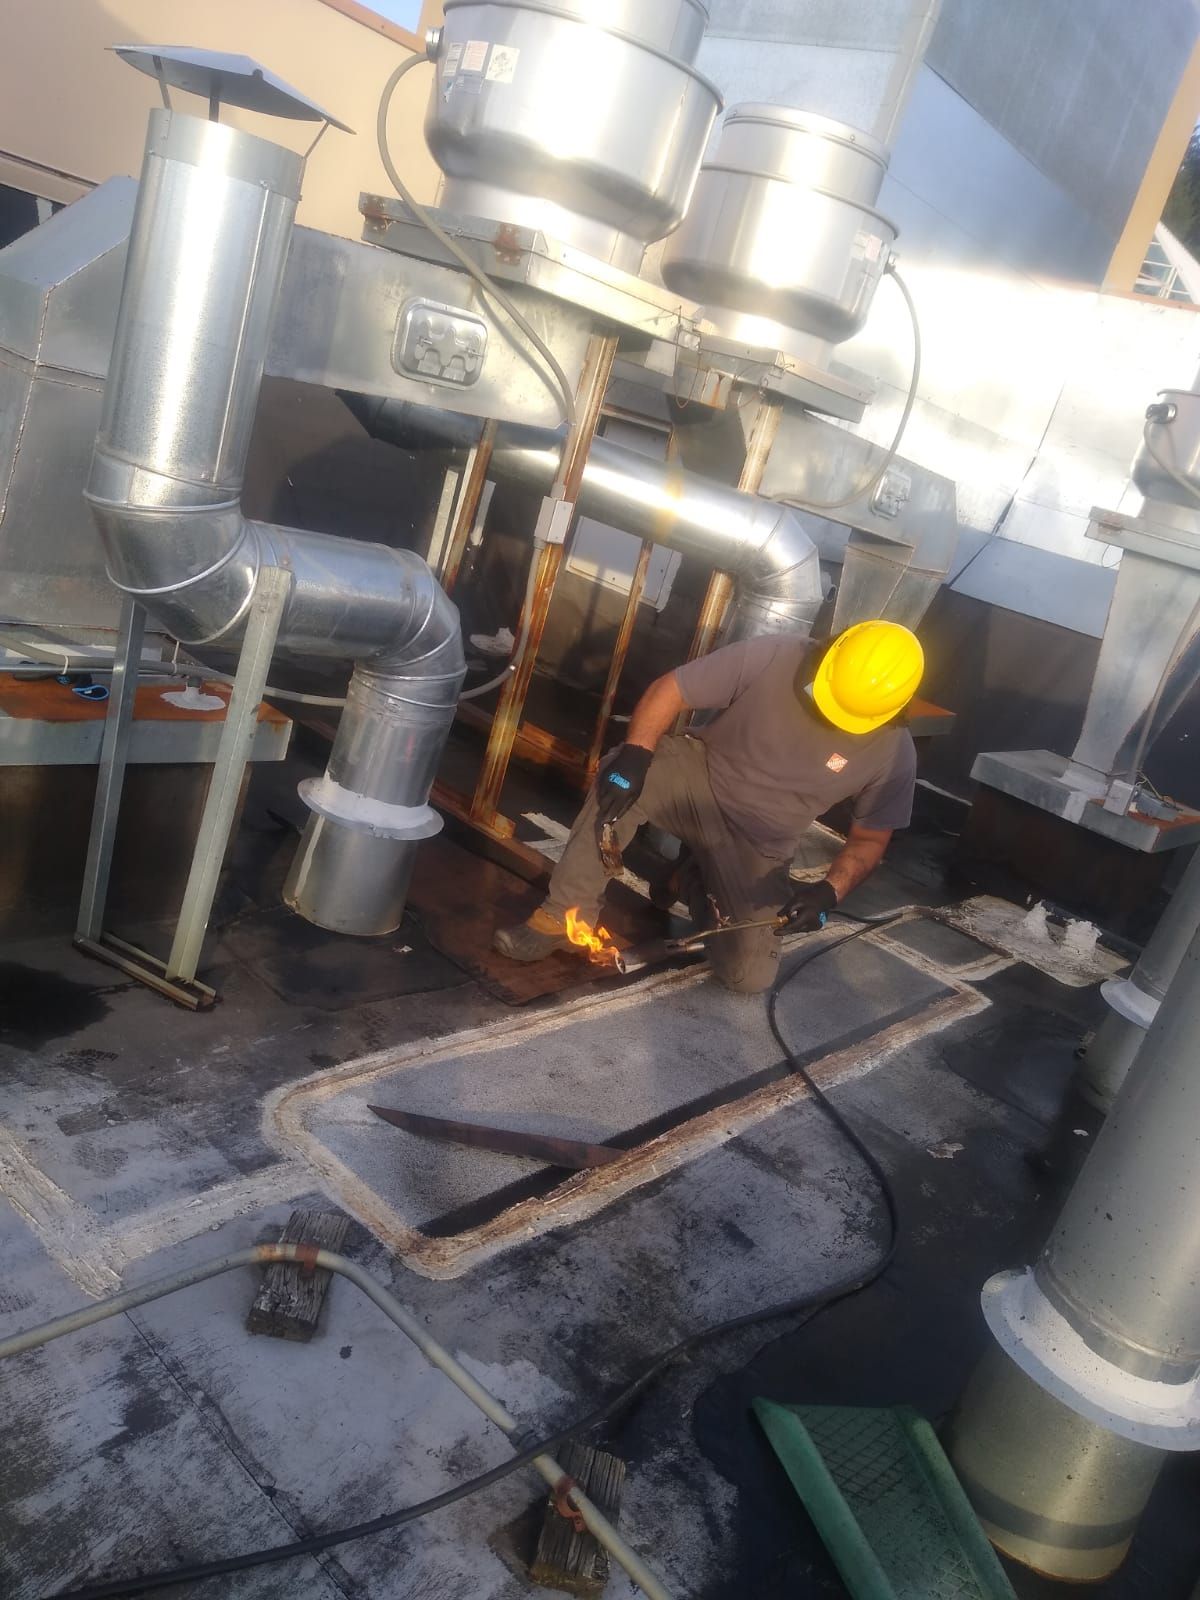 A Roofer is kneeling on a commercial roof, carefully torching down a patch. This expert repair work is ensuring the longevity and performance of the roof.